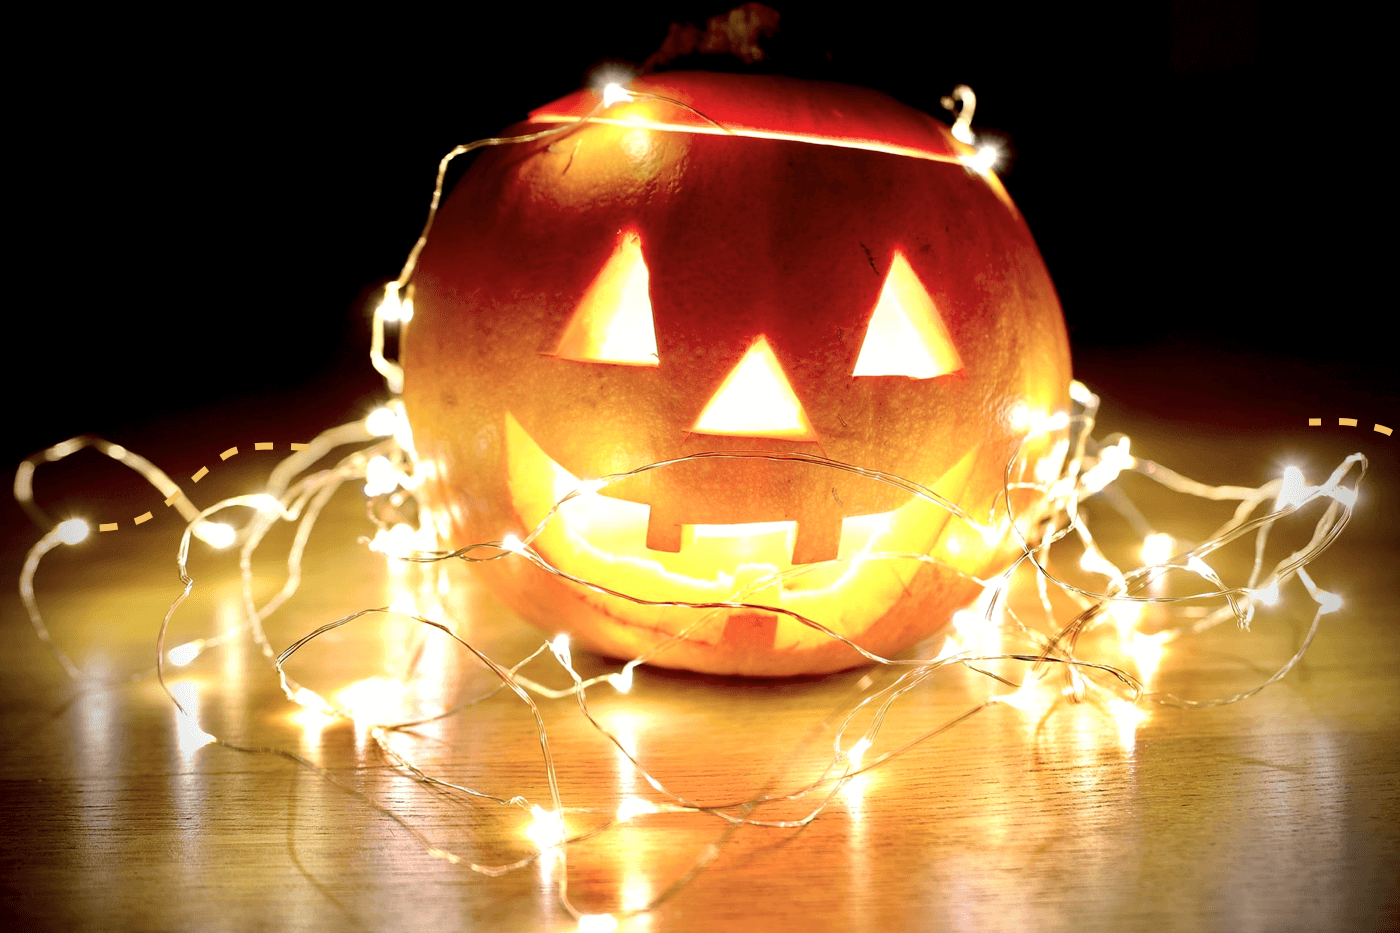 30 Spooky Subject Lines Perfect for Halloween